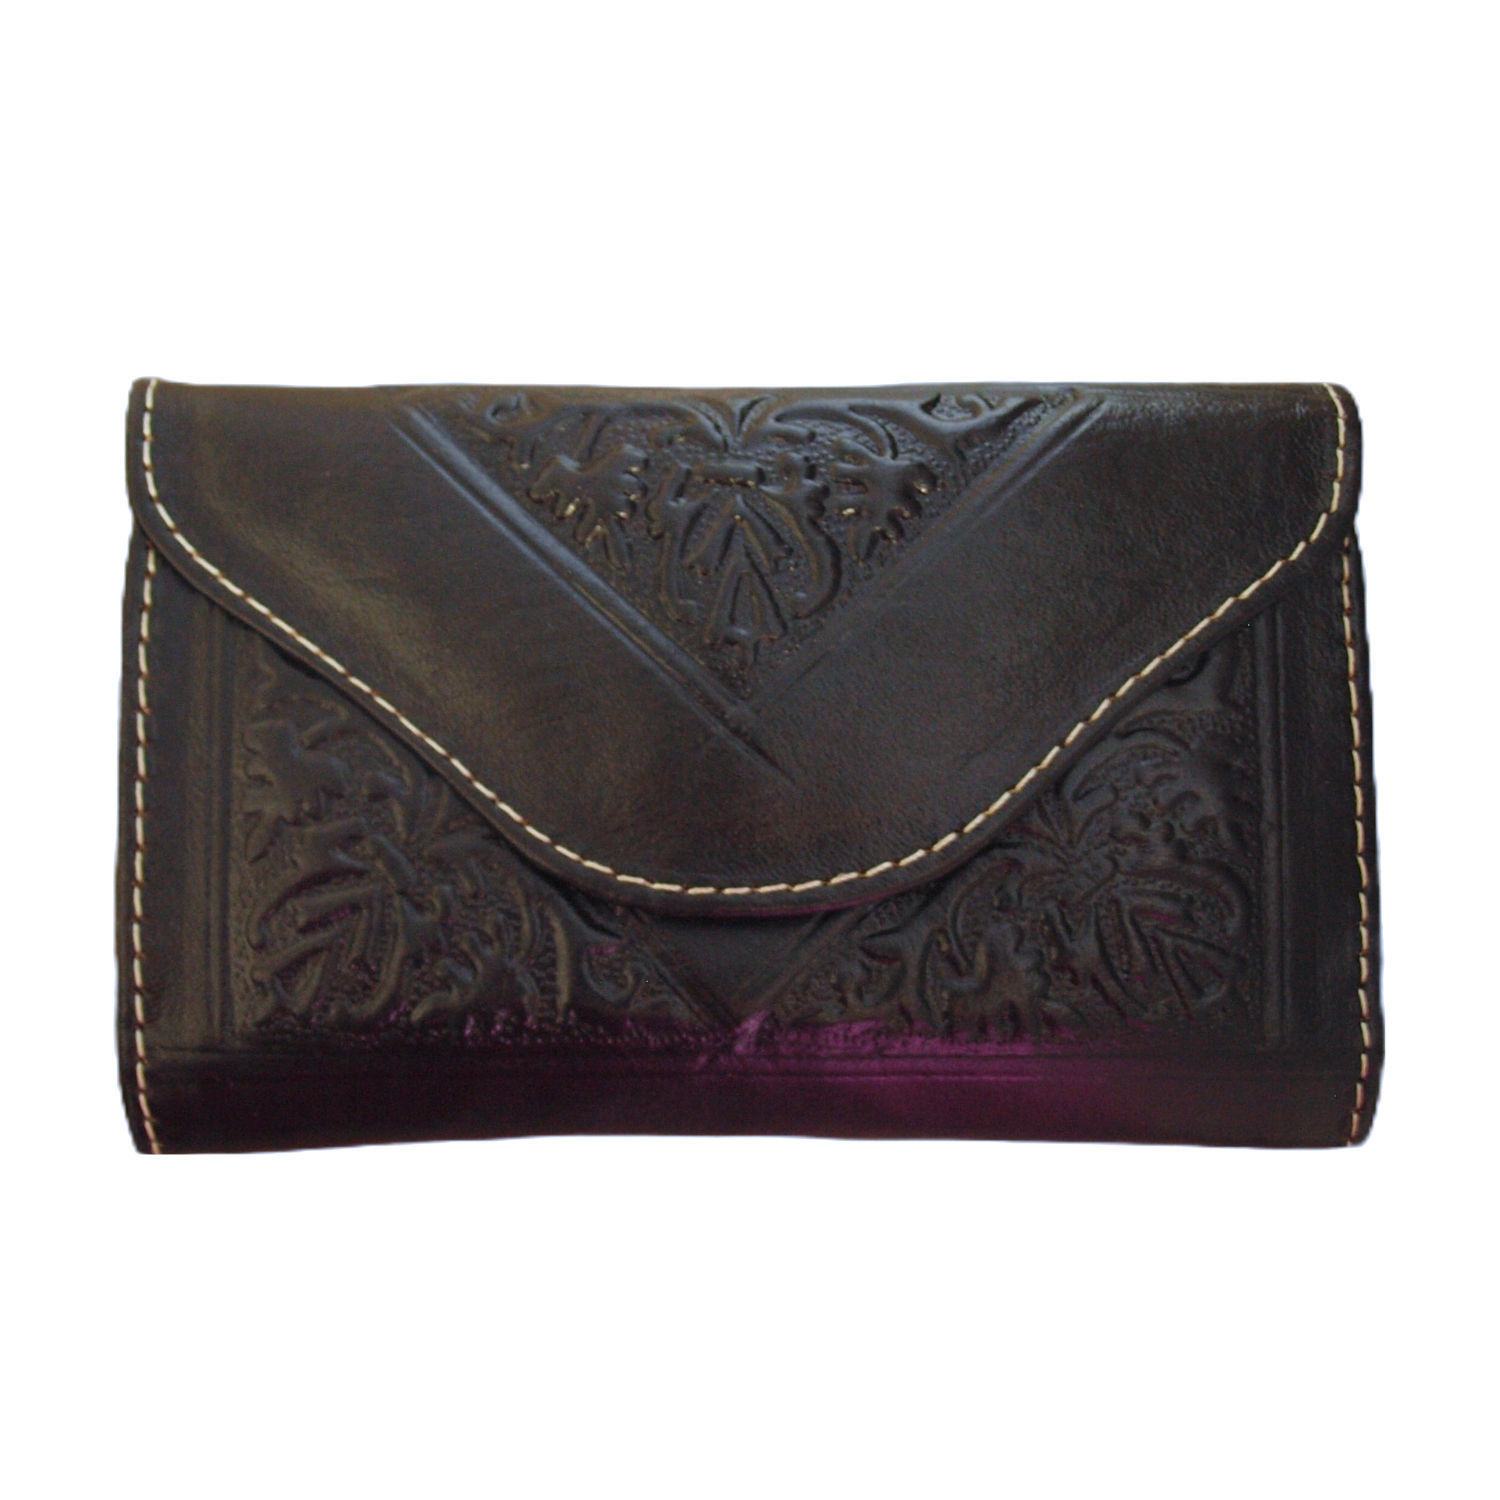 Small Leather Tri-Fold Purse Black on White Background